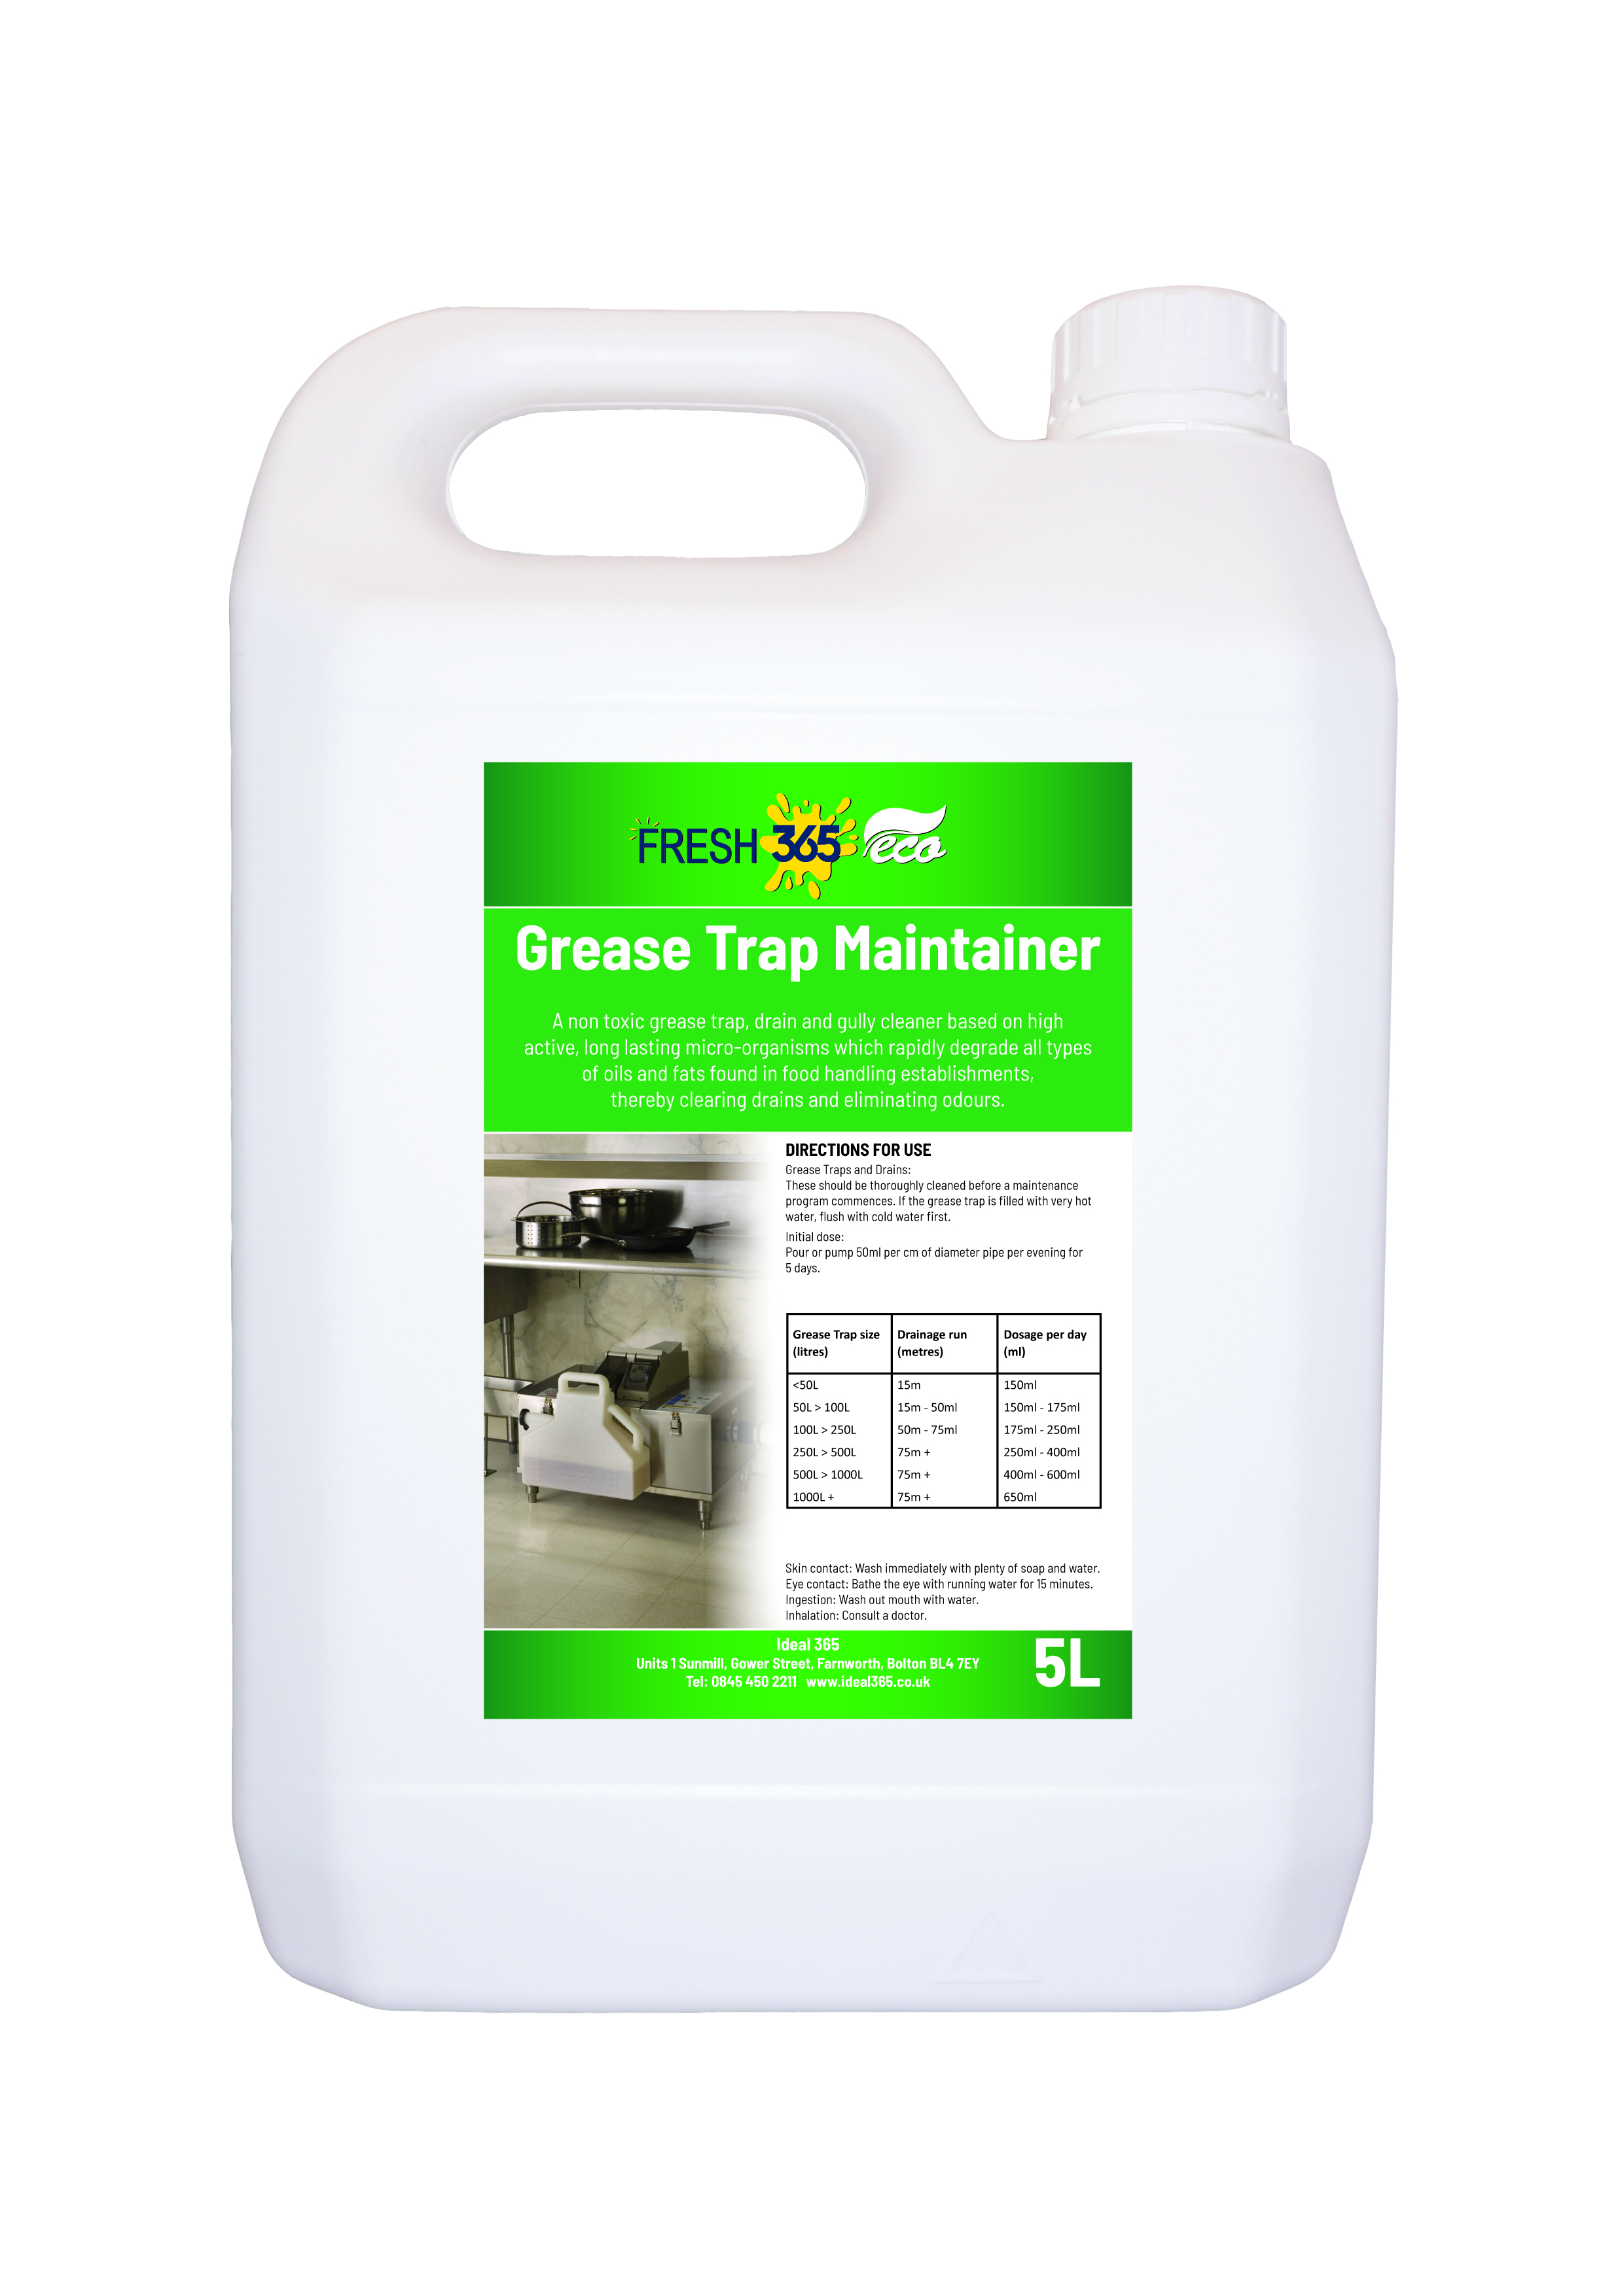 Fresh 365 grease trap maintainer 5 litre